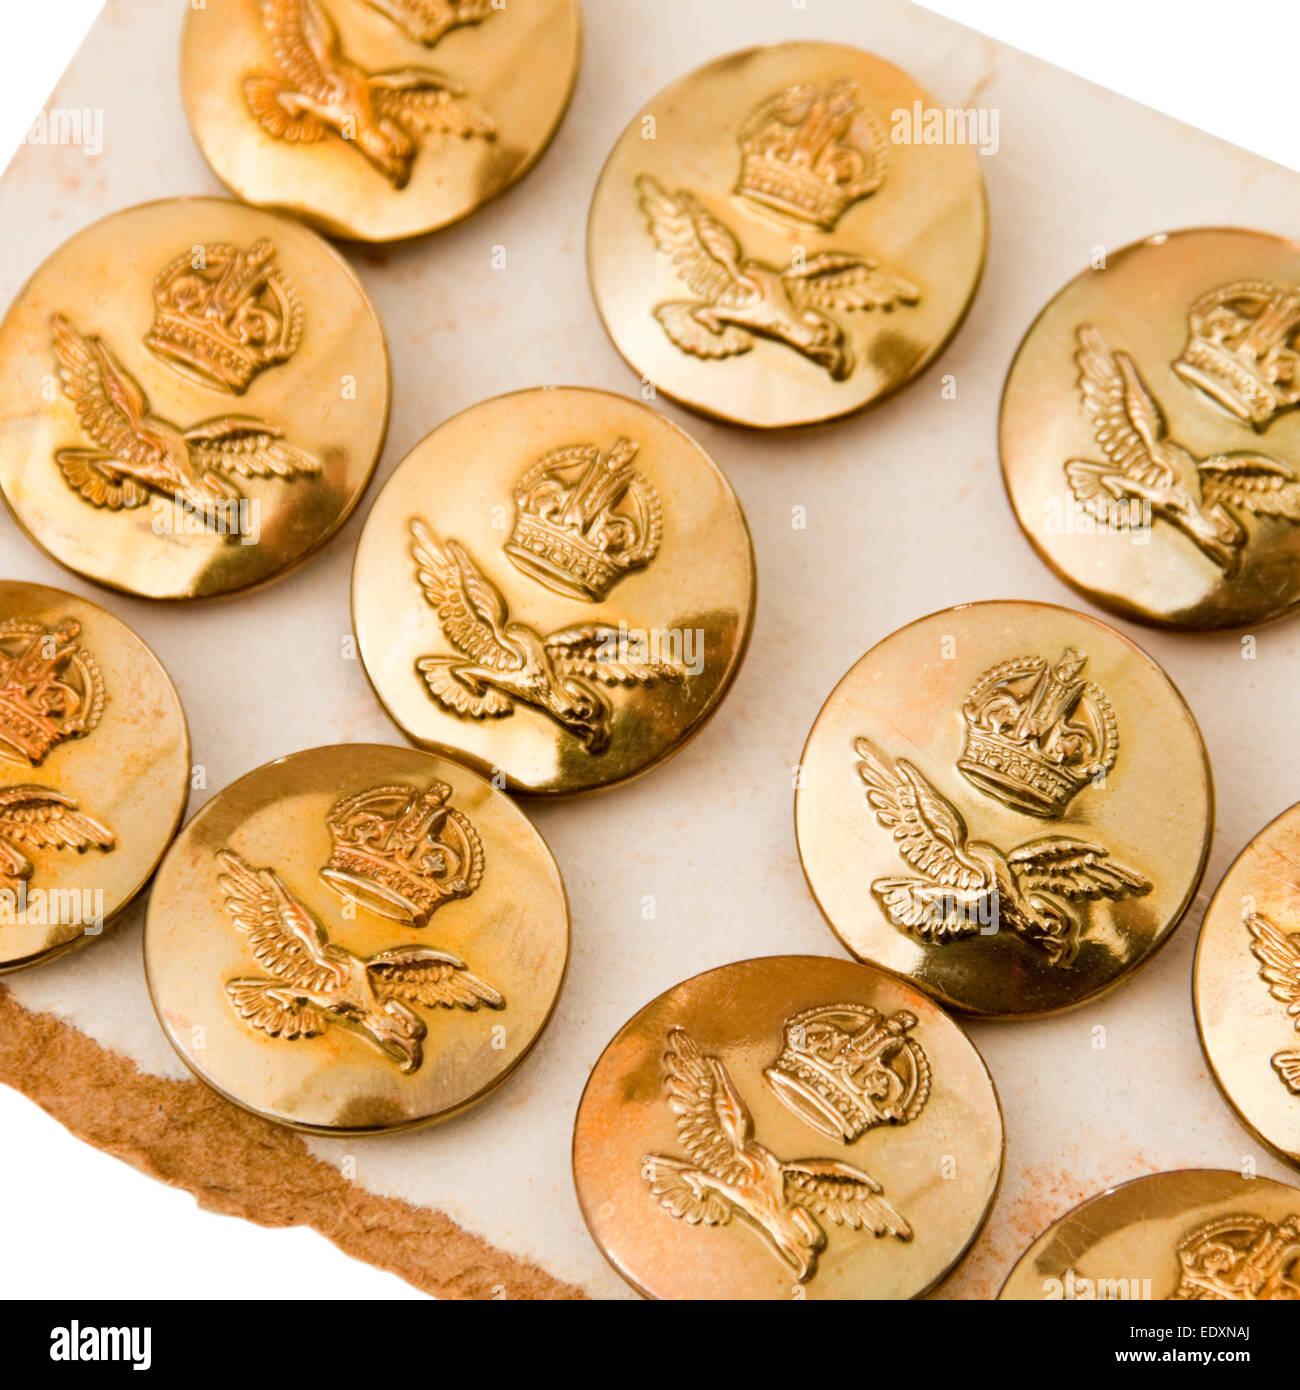 Selection of vintage British Royal Air Force (RAF) uniform buttons, made by Buttons Ltd in Birmingham, England Stock Photo